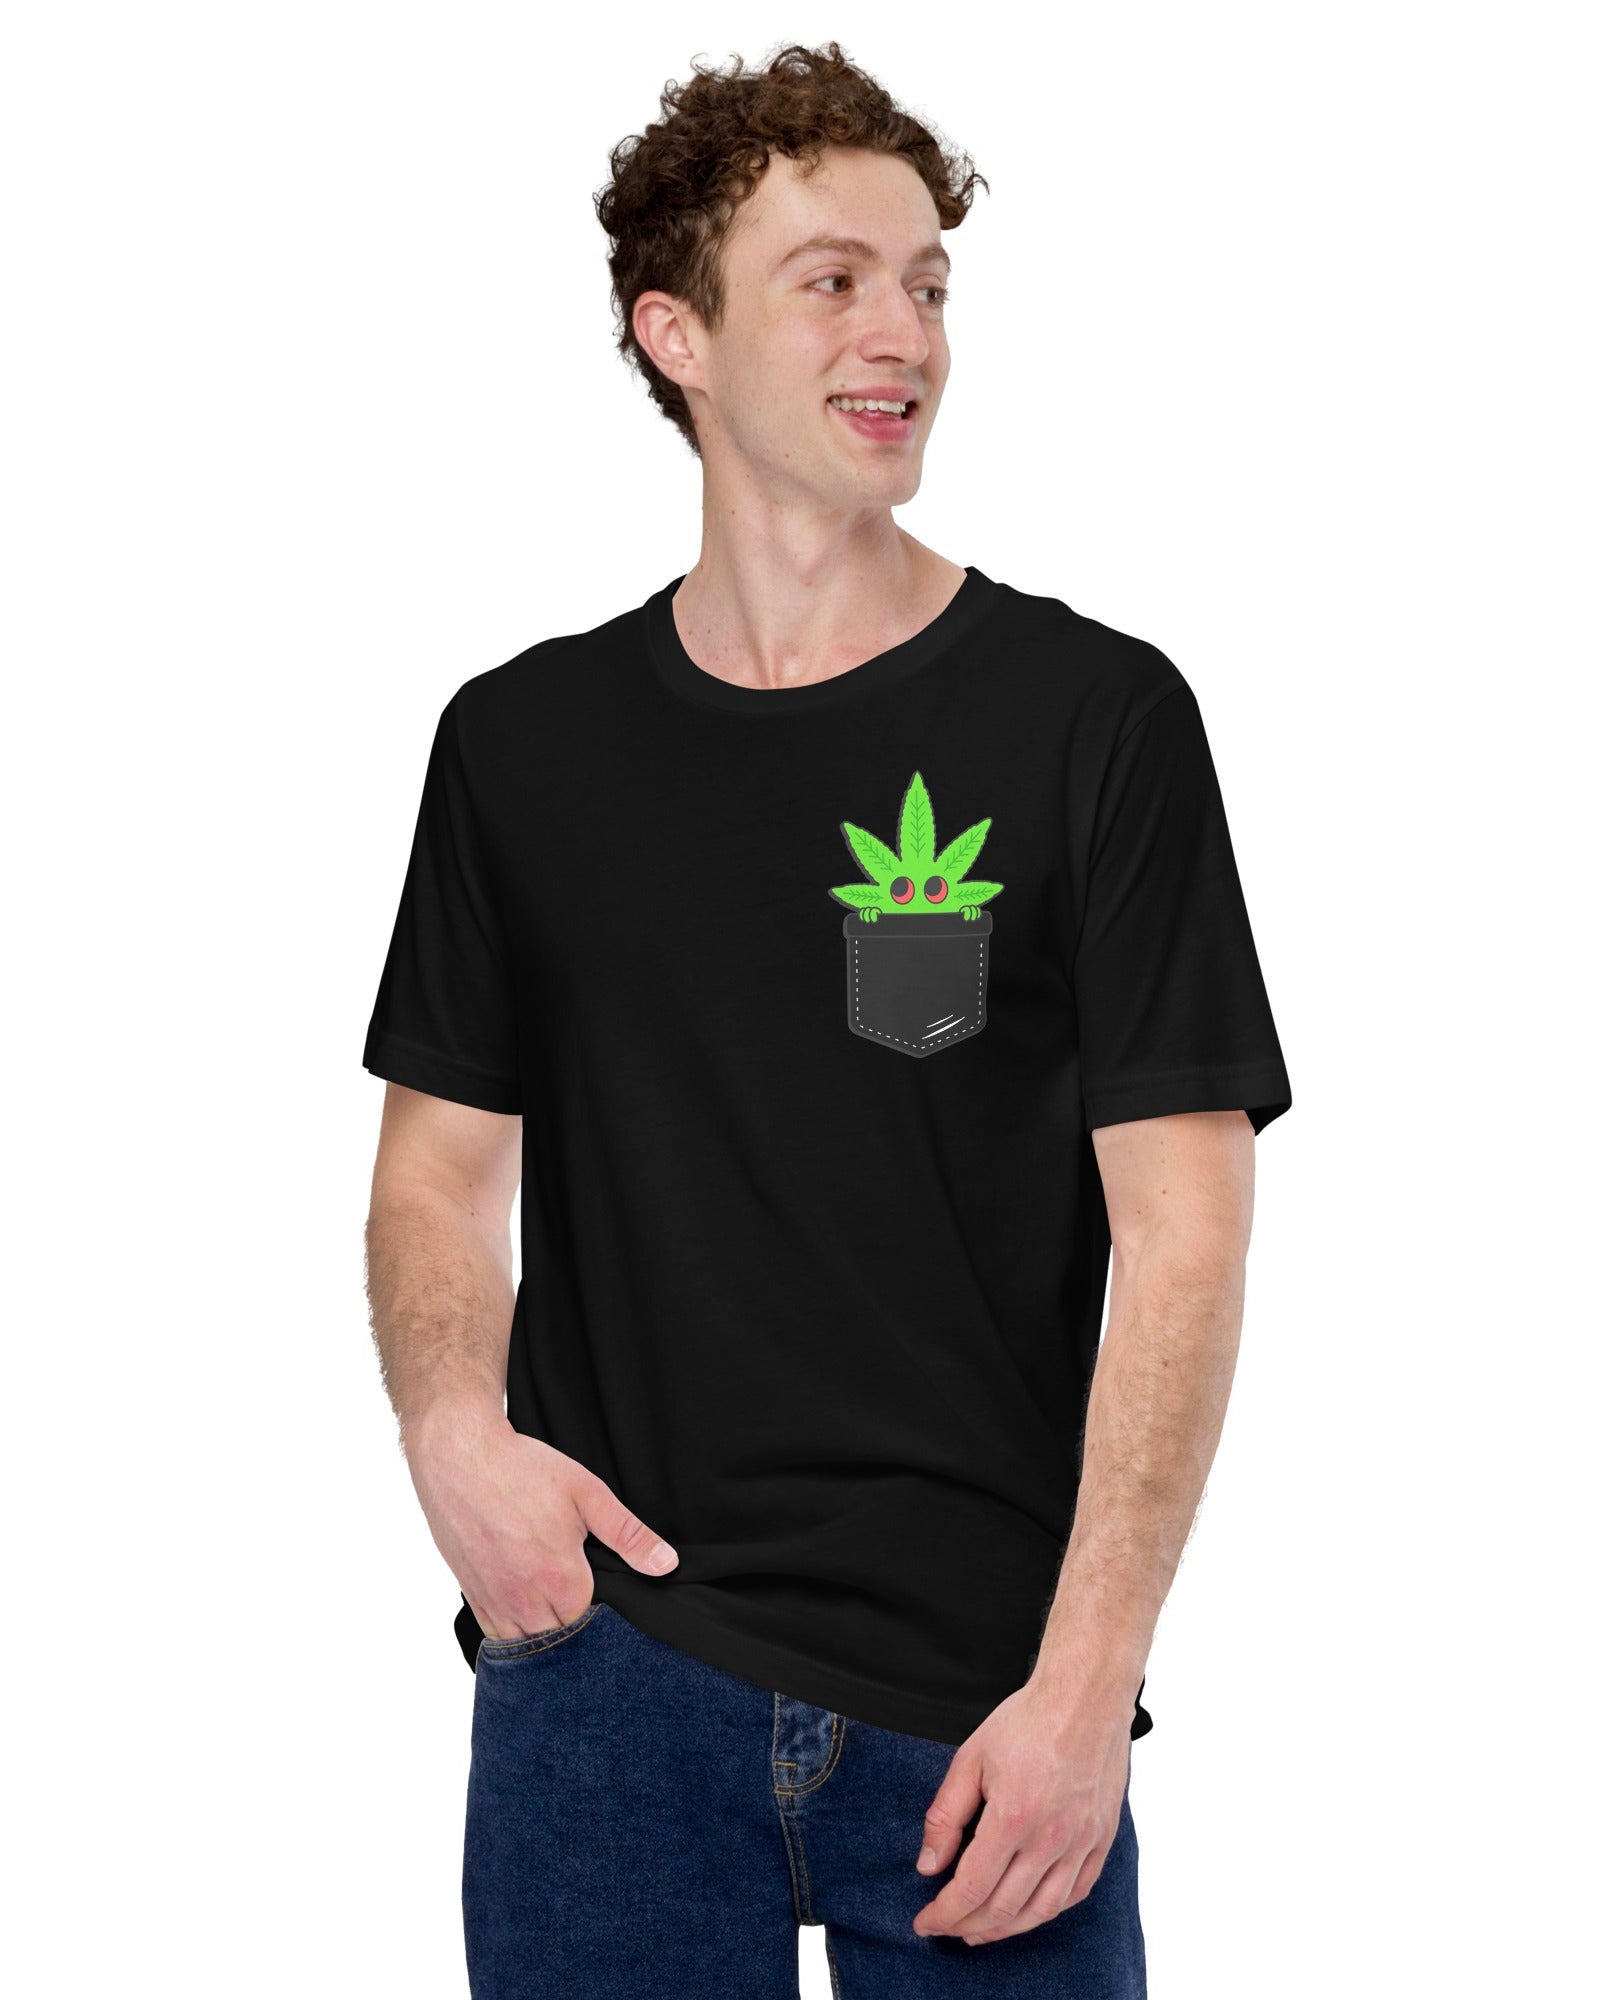 Pocket Weed T-Shirt, T-Shirt, - One Stop Rave